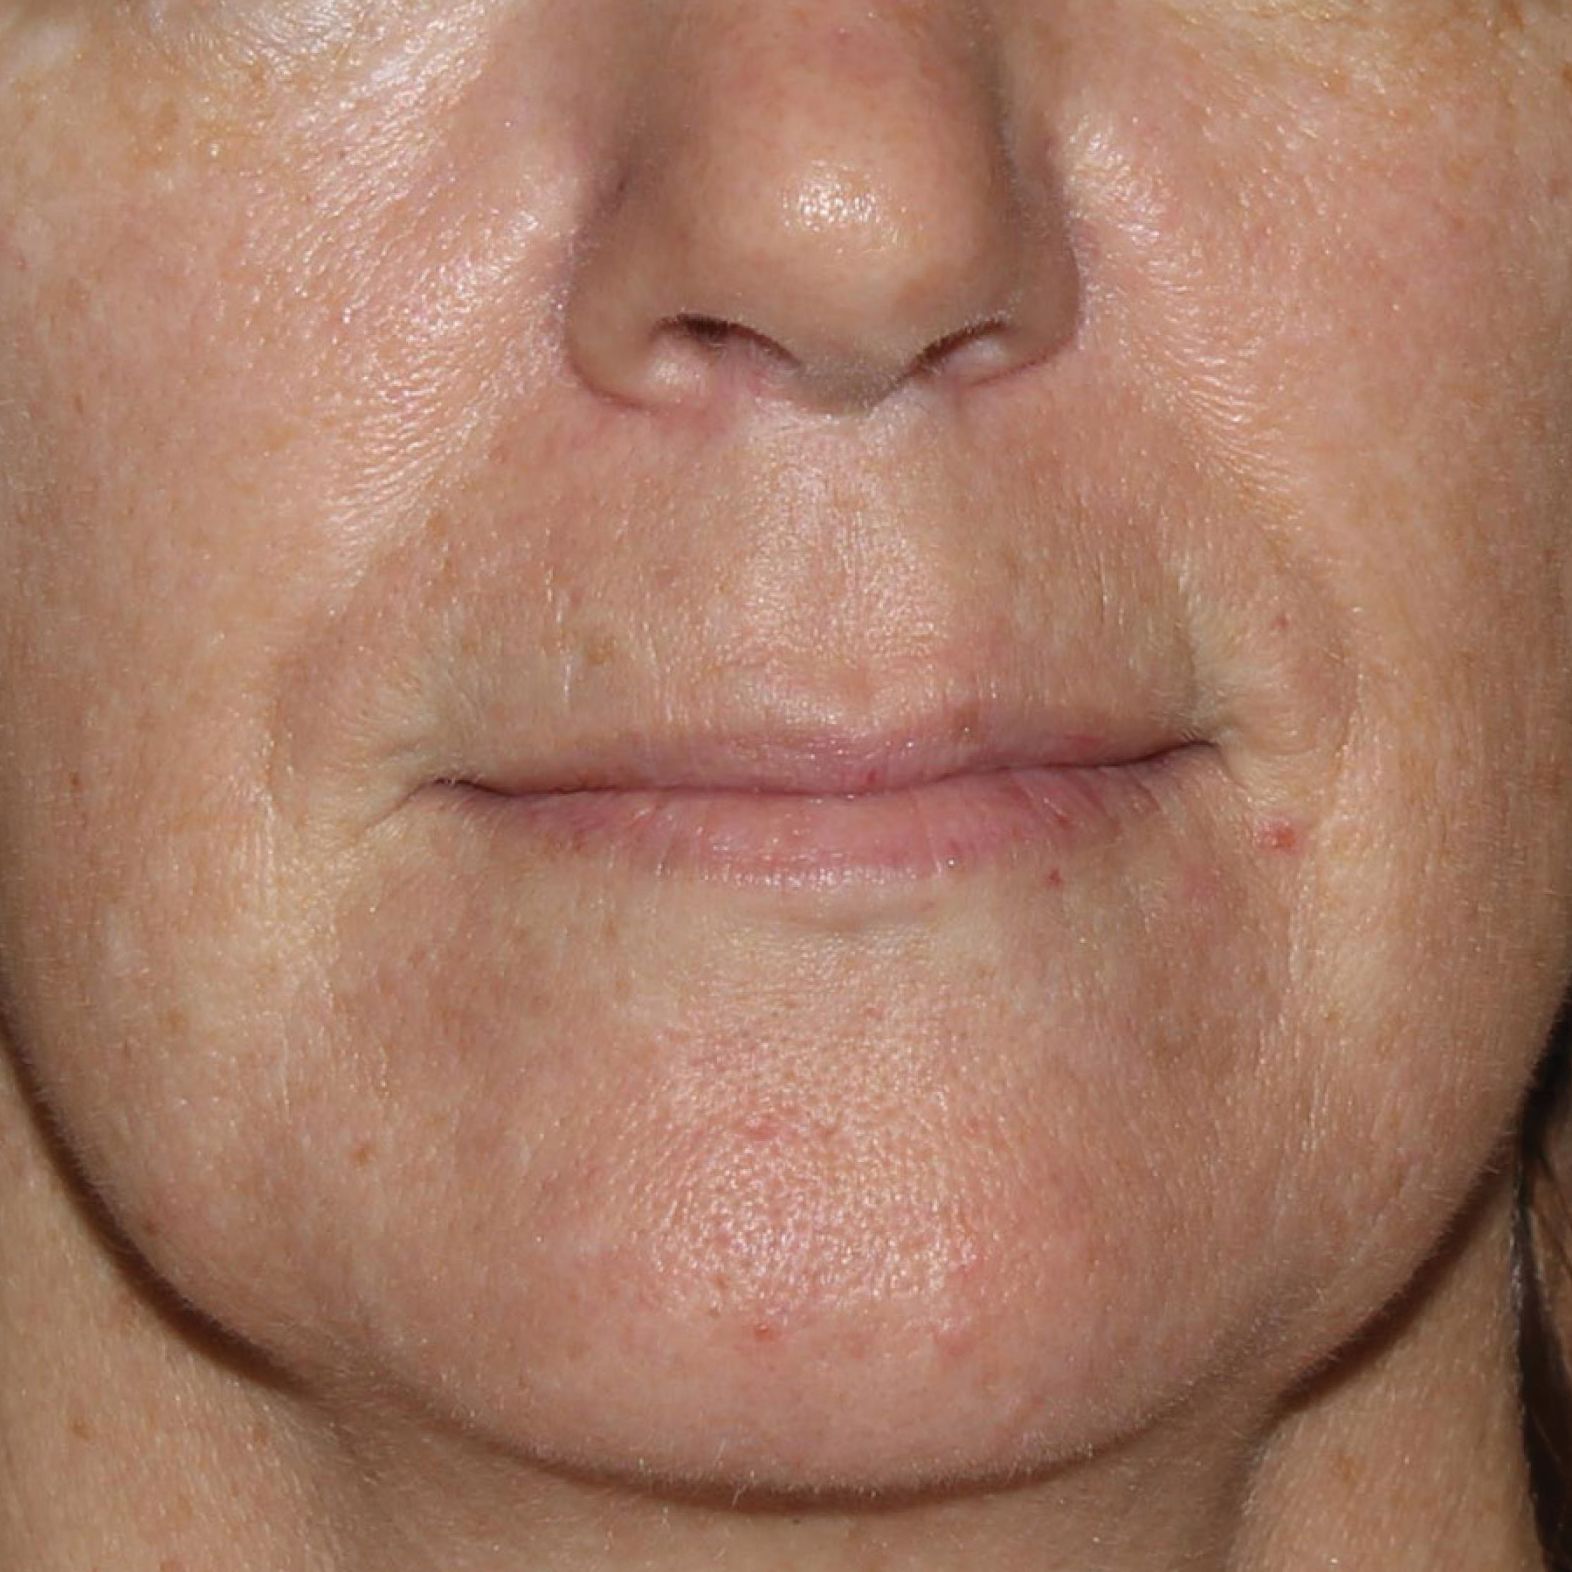 a close up of a woman 's face with her mouth open before treatment